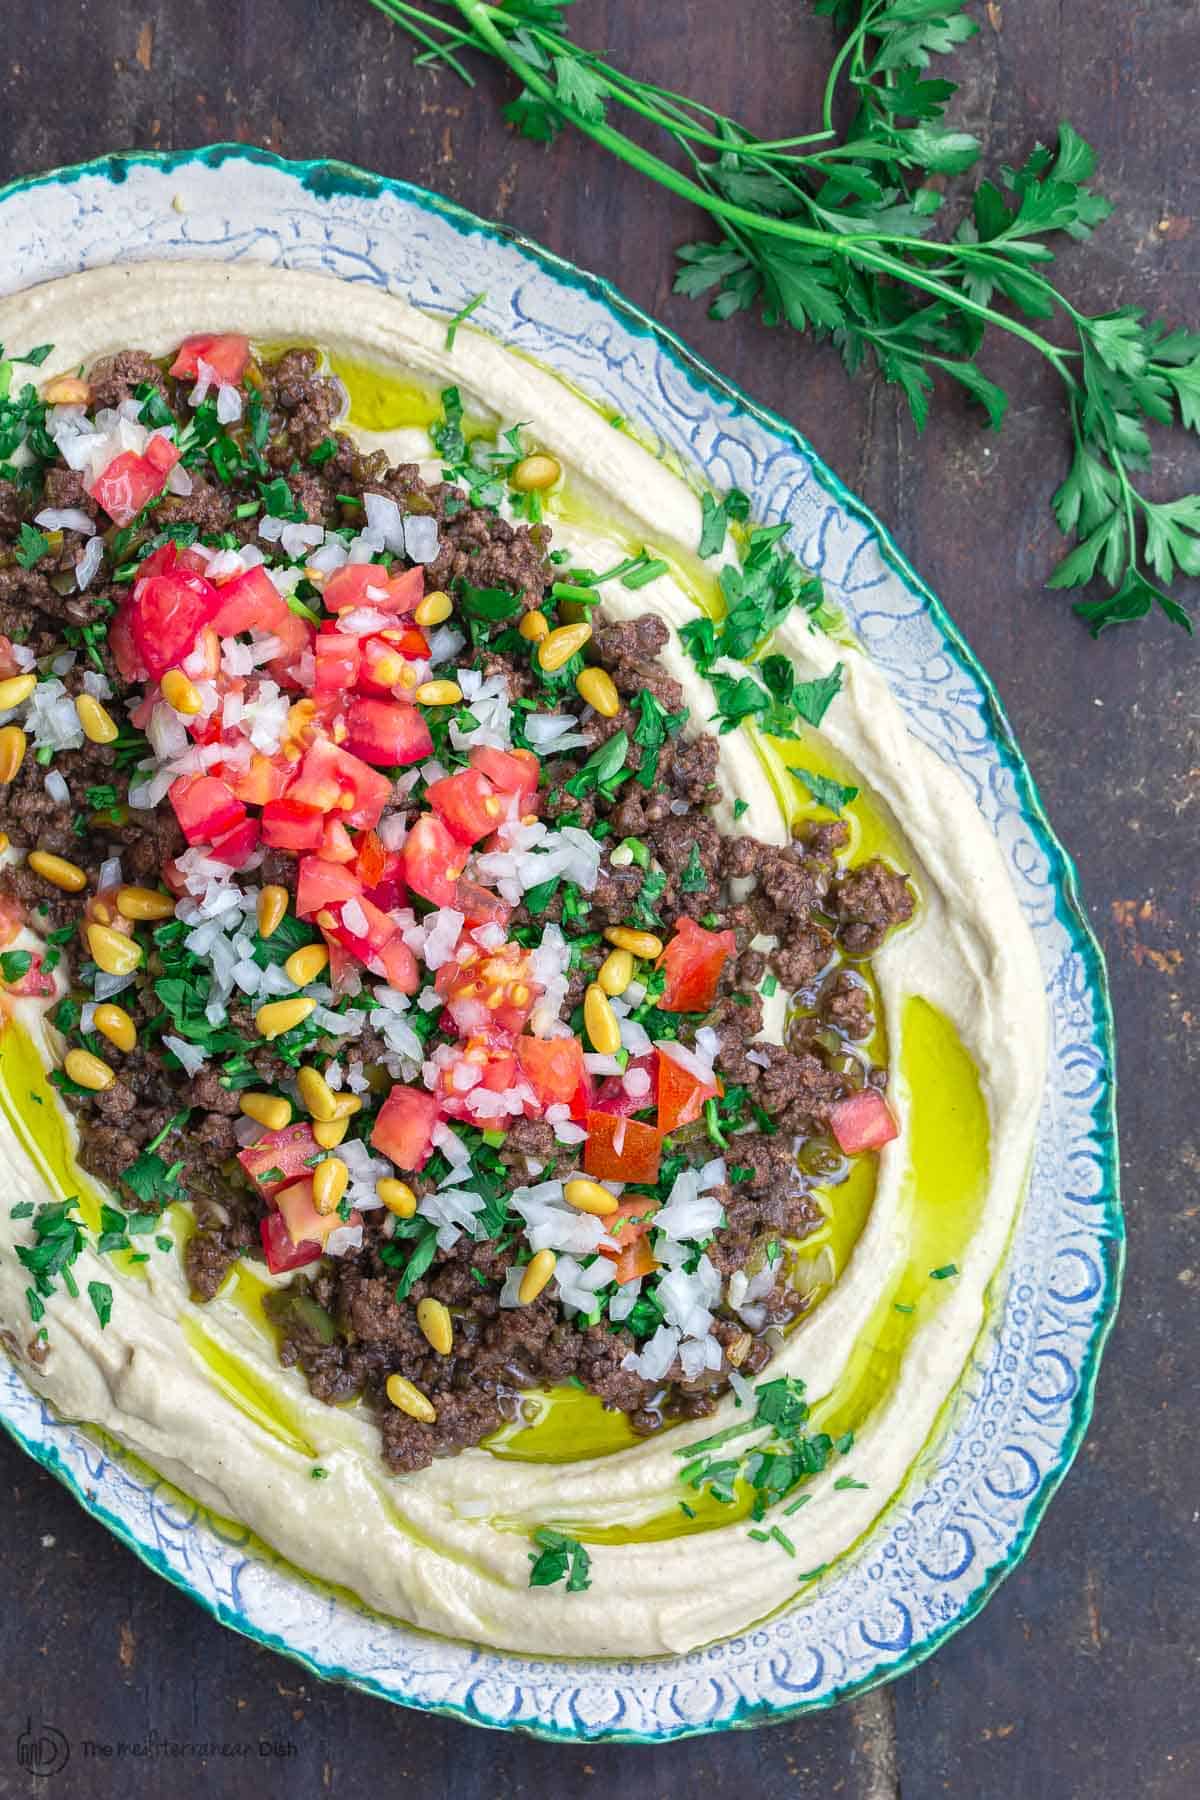 Hummus dip layered with ground beef, tomatoes, onions, parsley, and pine nuts